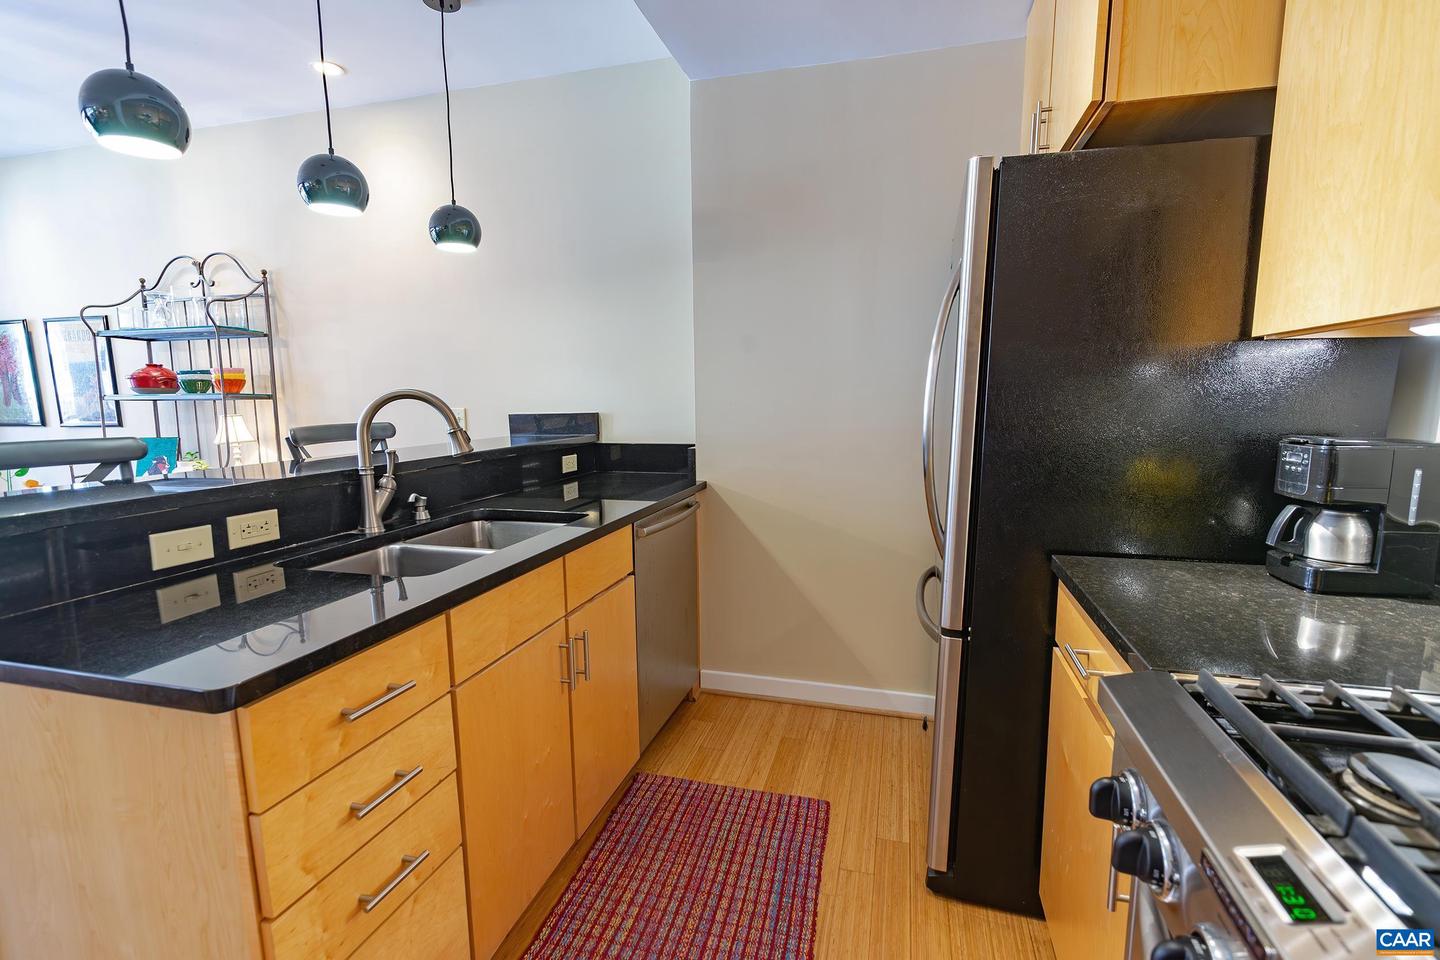 105 MONTICELLO AVE #301, CHARLOTTESVILLE, Virginia 22902, 1 Bedroom Bedrooms, ,1 BathroomBathrooms,Residential,For sale,105 MONTICELLO AVE #301,651308 MLS # 651308